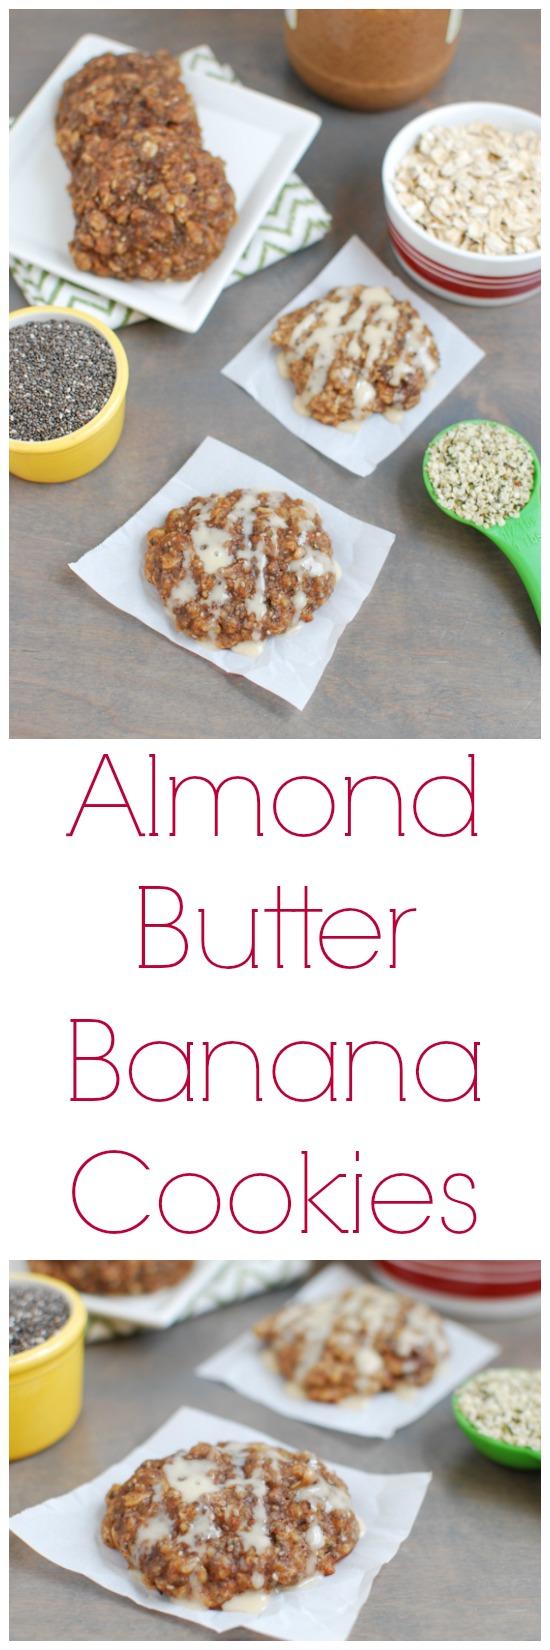 These Almond Butter Banana Cookies are gluten-free and lightly sweetened with maple syrup. They're packed with protein and fiber and are healthy enough for breakfast. Add a little glaze and you've got dessert!